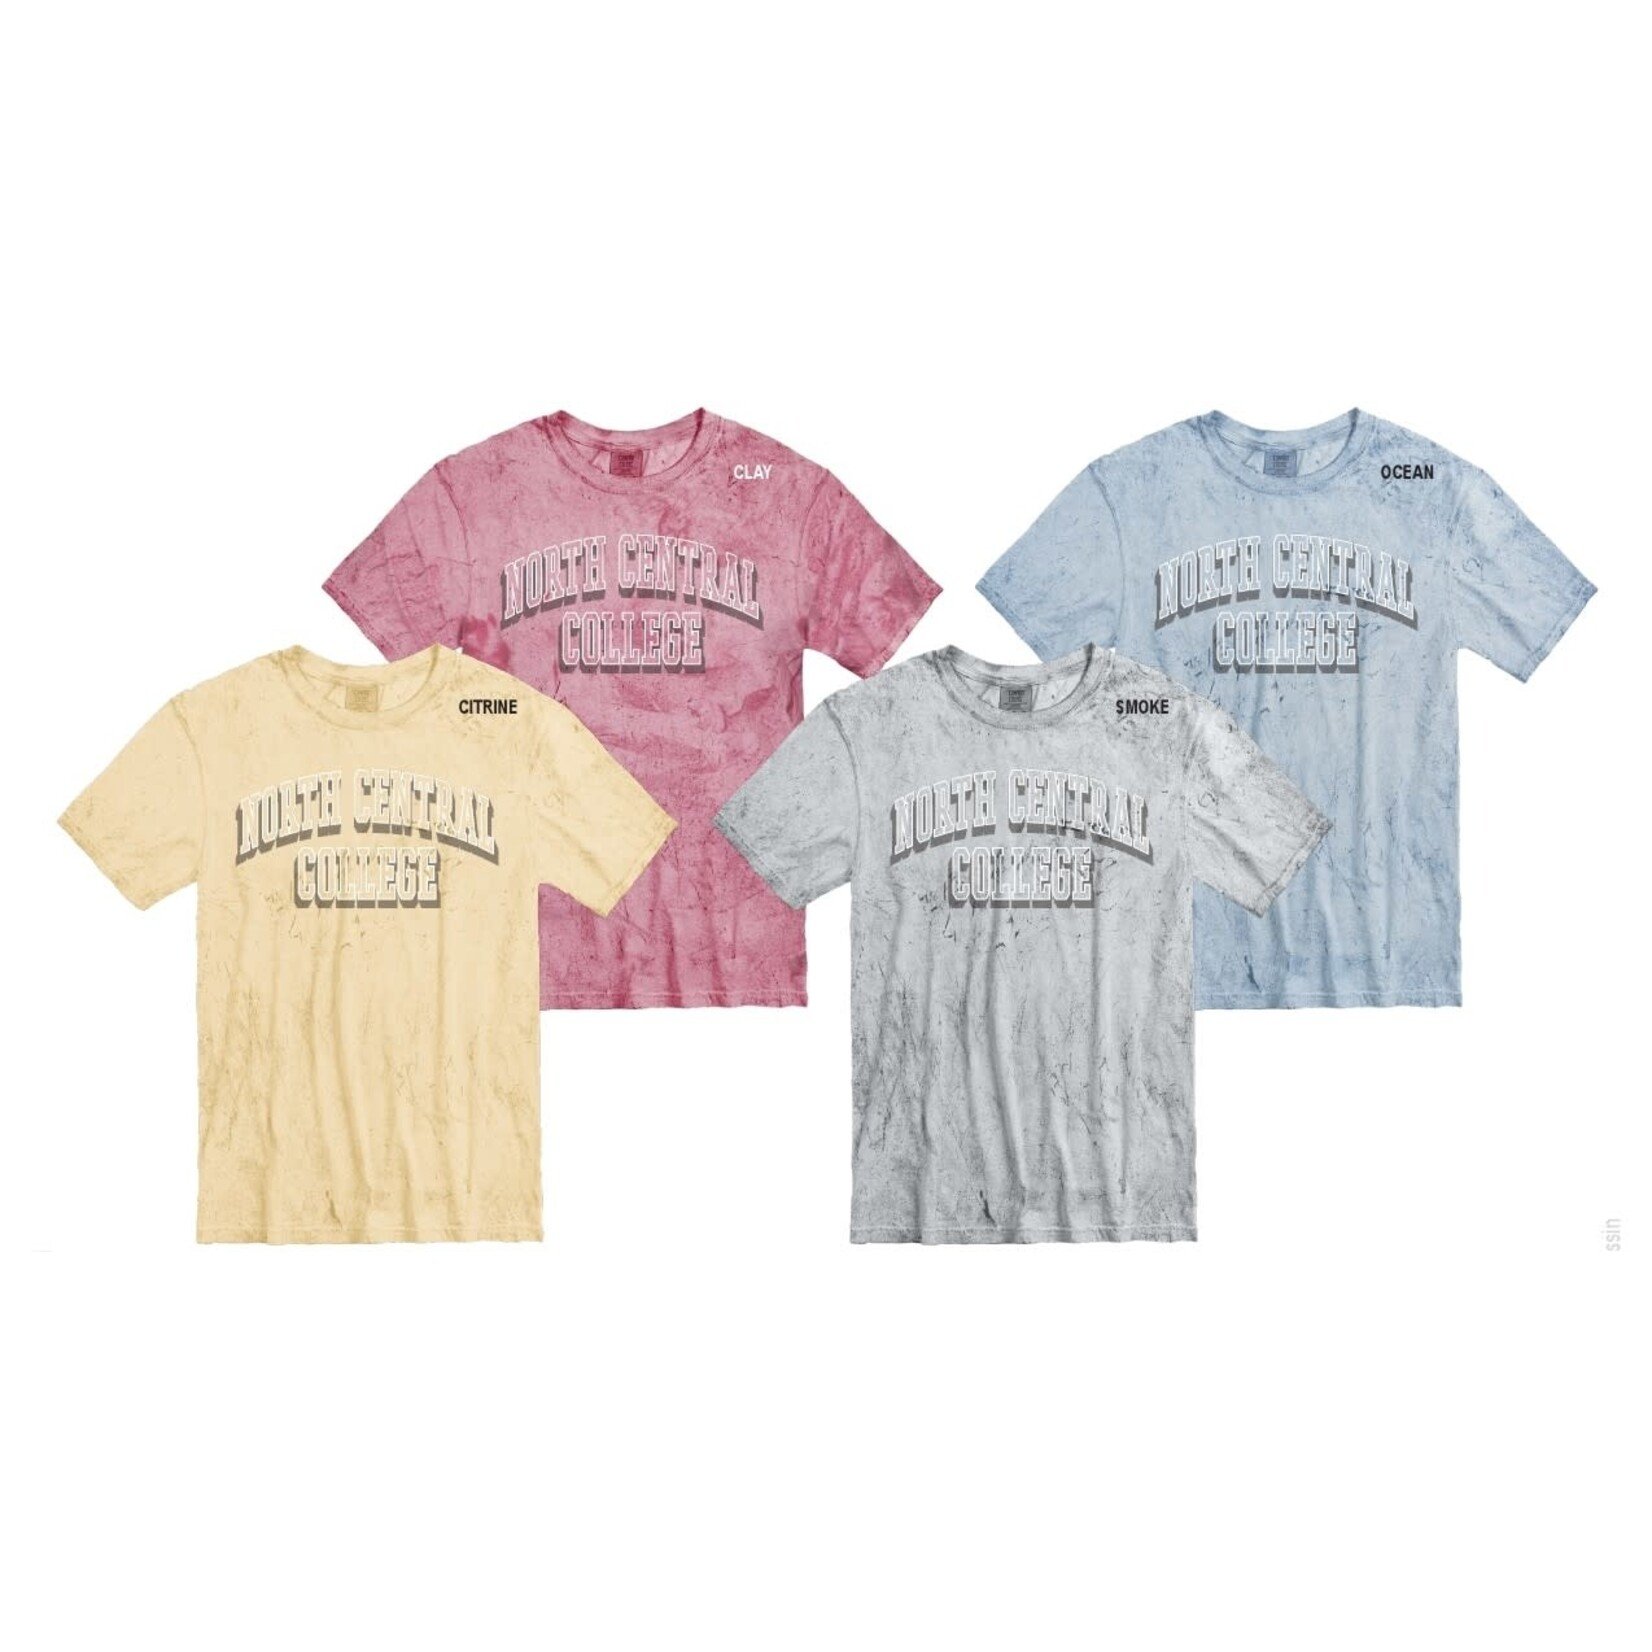 North Central College Comfort Color Colorblast Tee